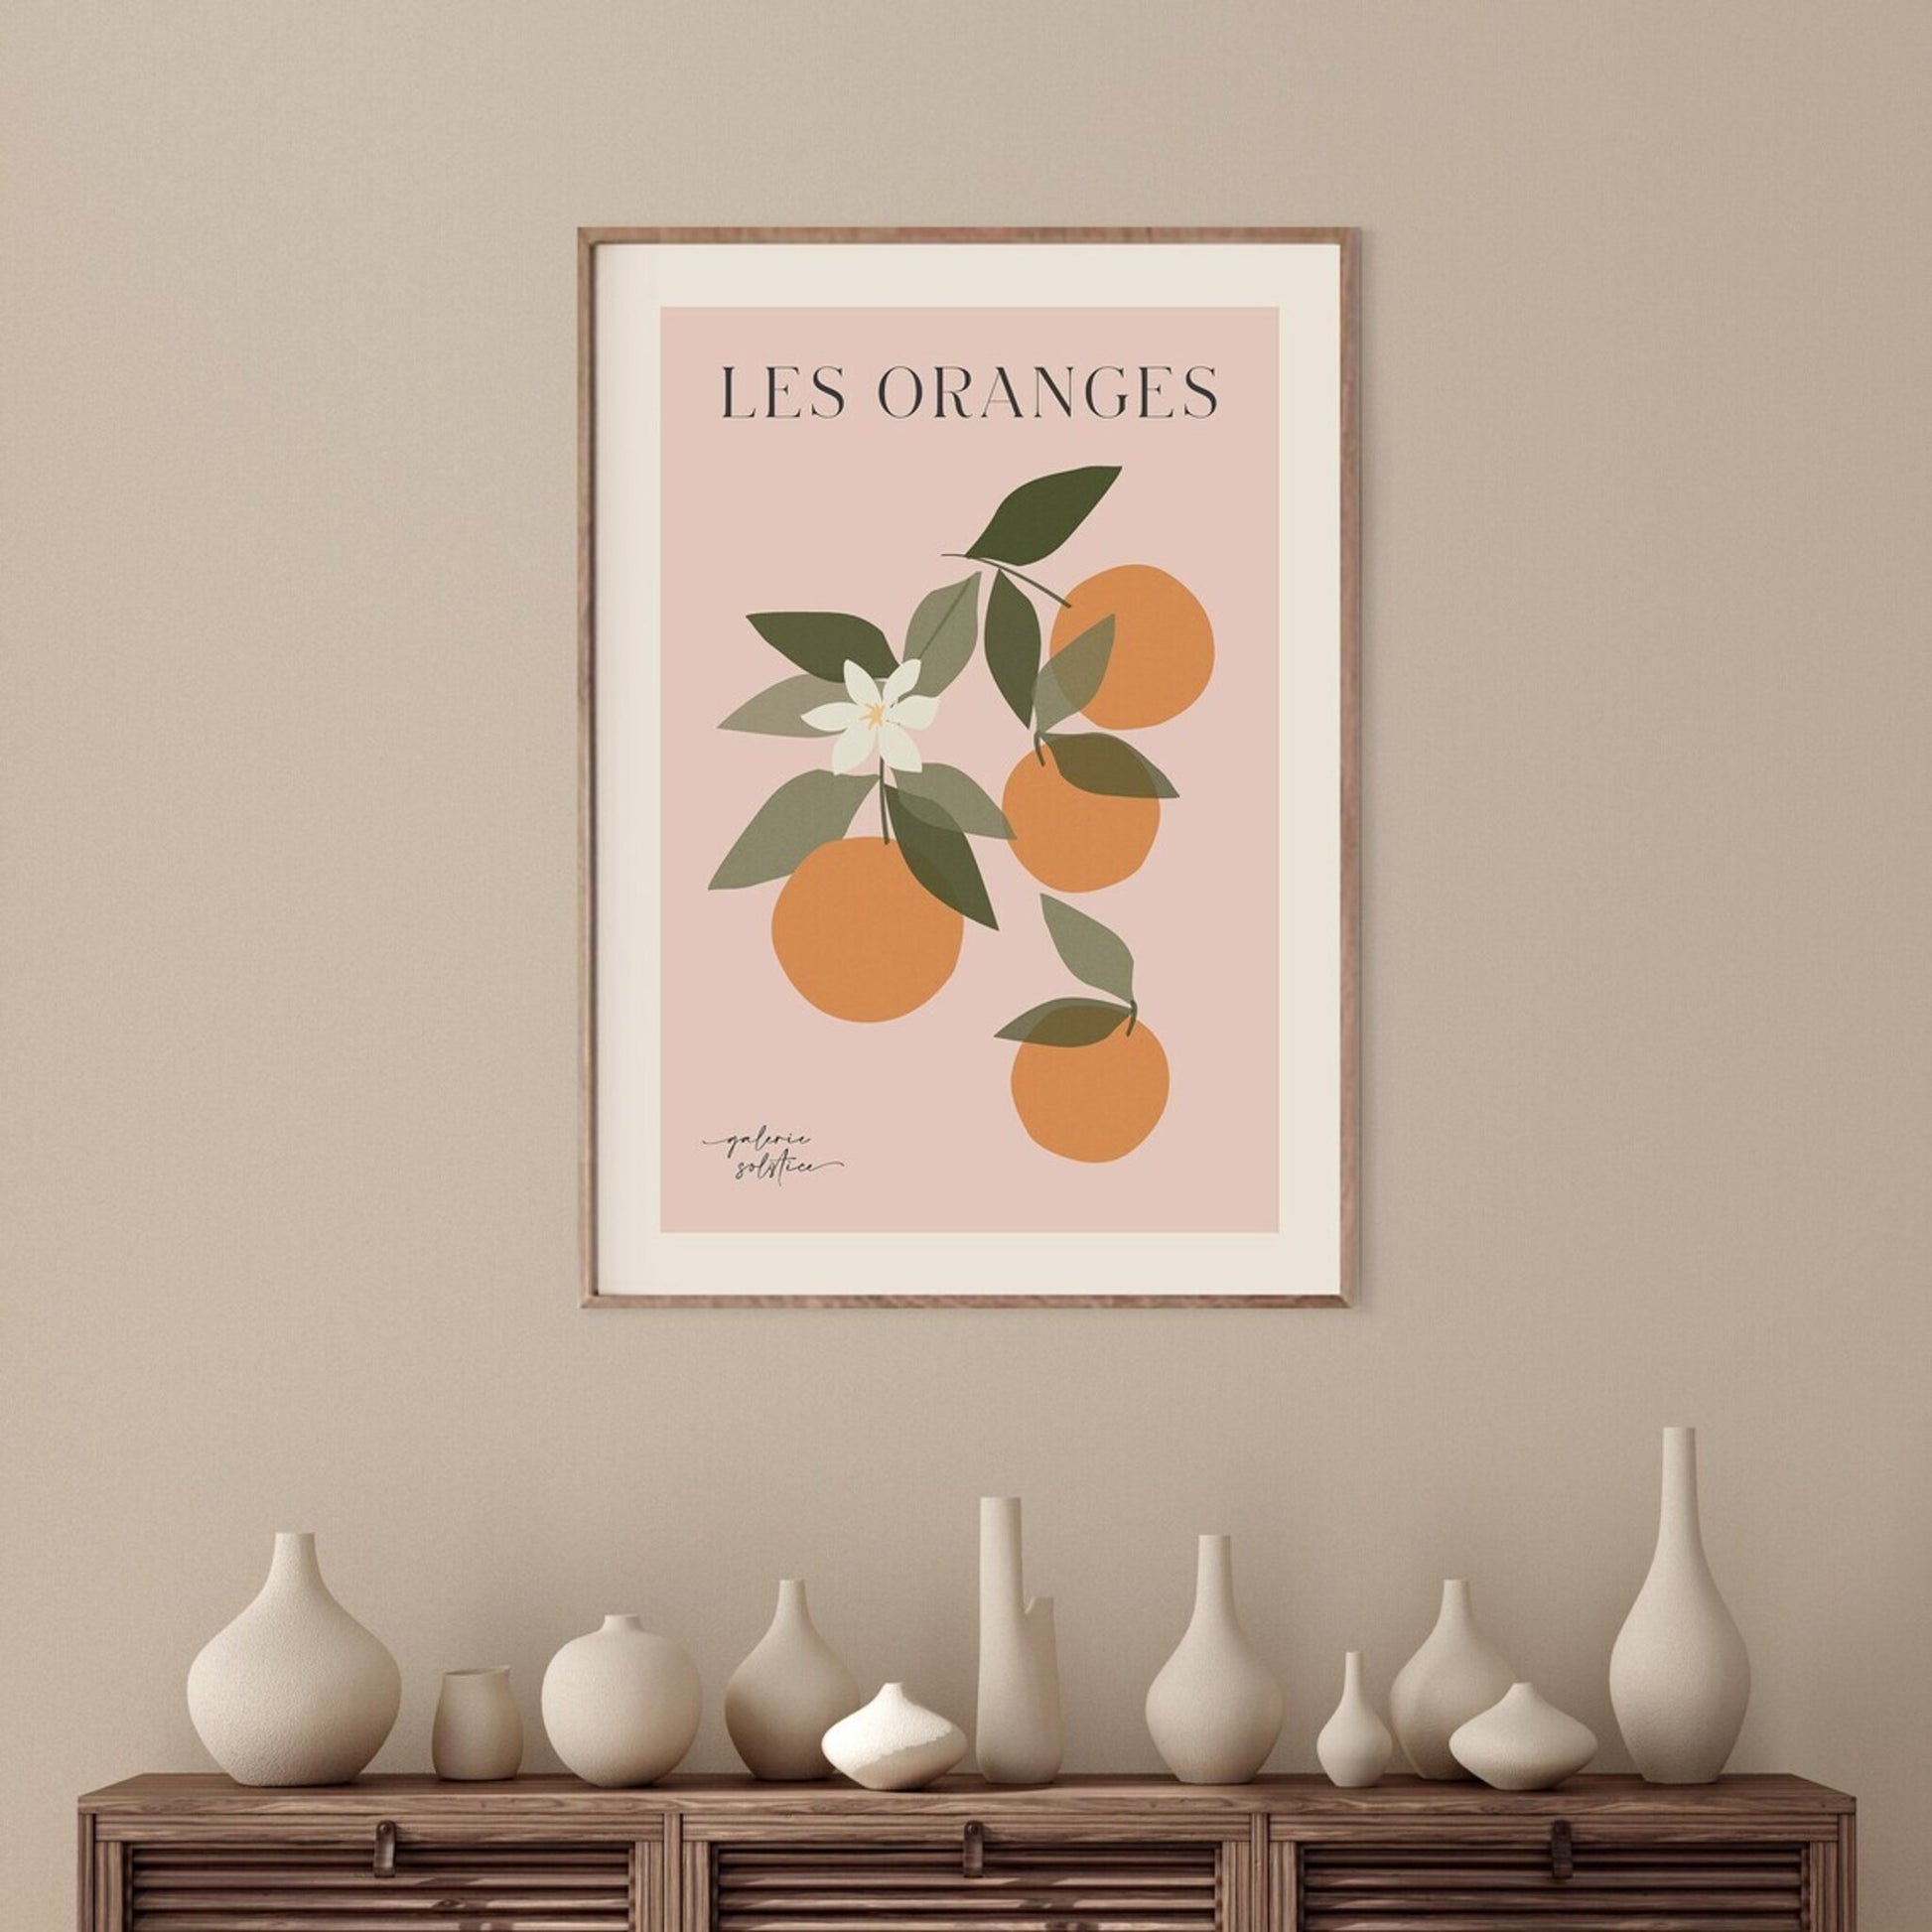 Framed print of oranges, green leaves and blossom hanging on wall.